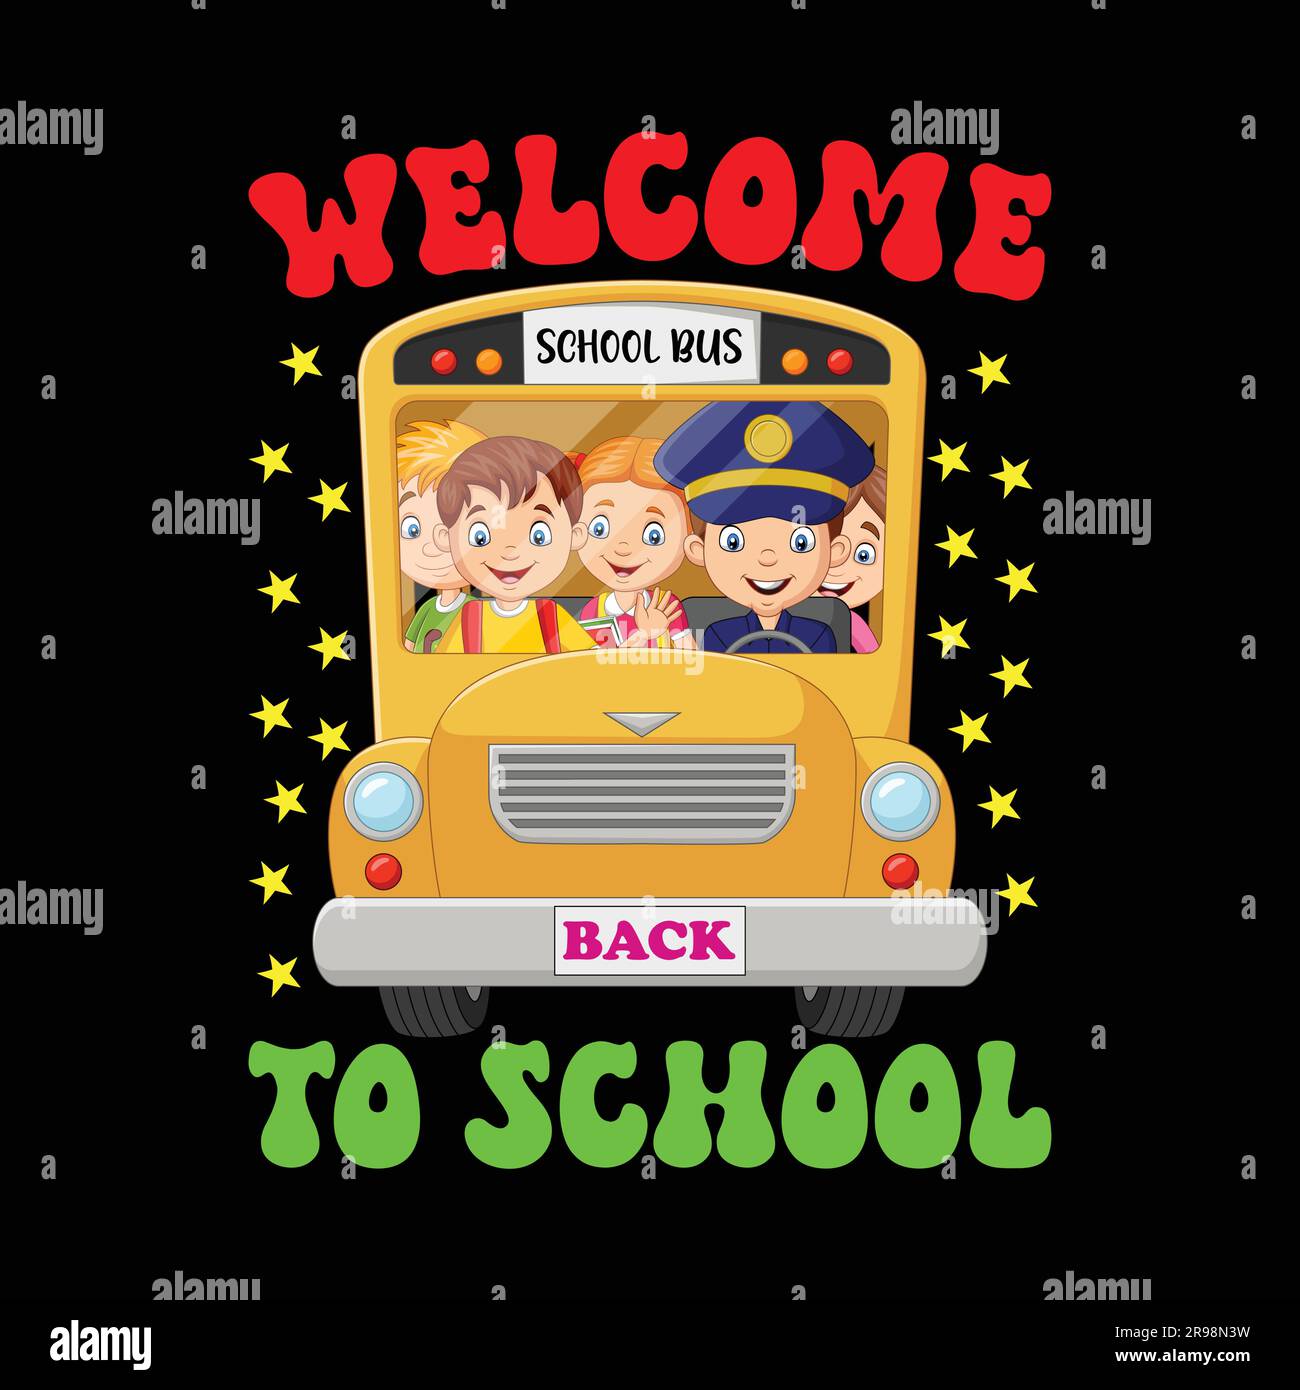 Welcome back to school t shirt design, back to school t shirt design. Stock Vector